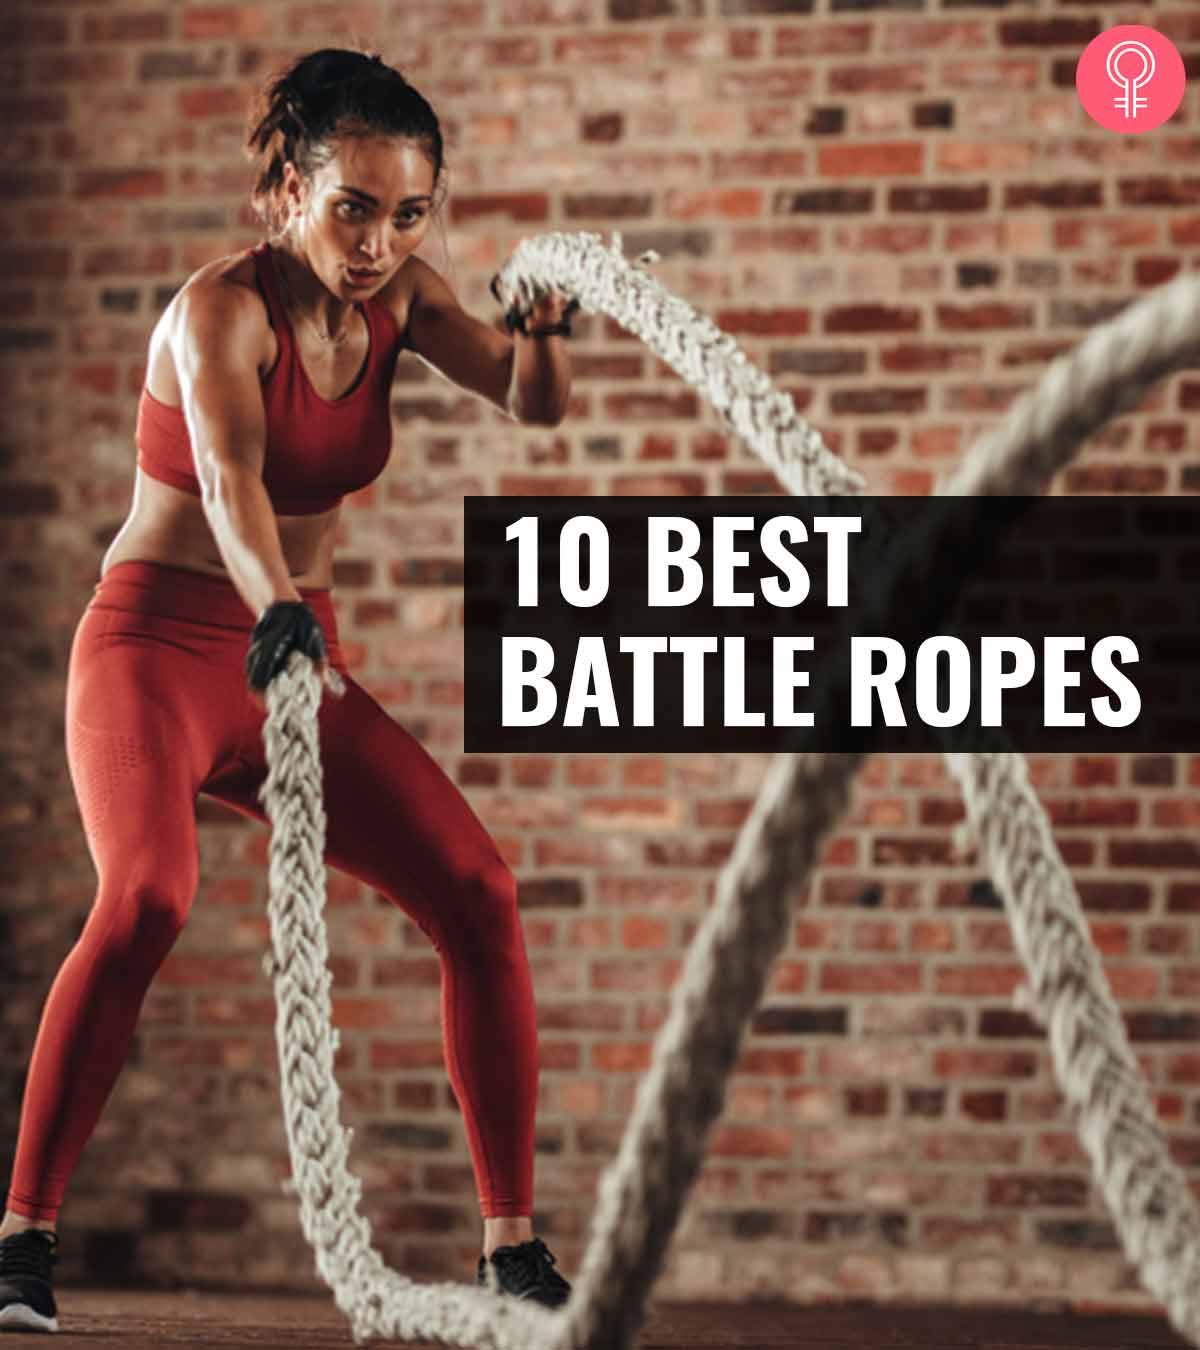 The 10 Best Battle Ropes For Your Next Workout, As Per An Expert – 2023